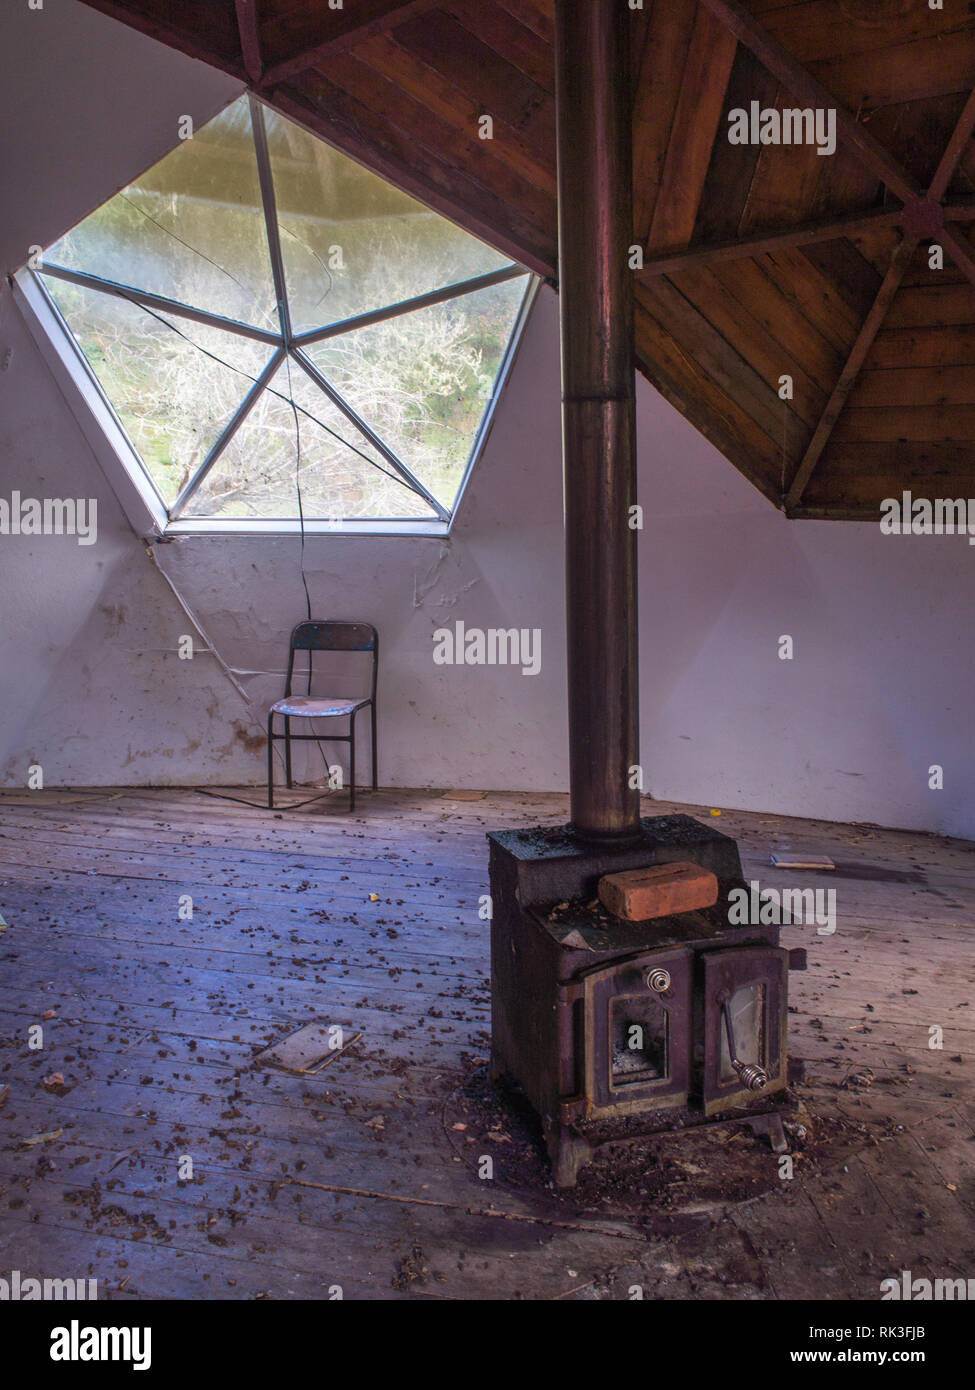 Empty chair and broken wood stove, interior of derelict community building, upstairs room, Ahu Ahu Ohu, Ahuahu Valley, Whanganui River, New Zealand Stock Photo